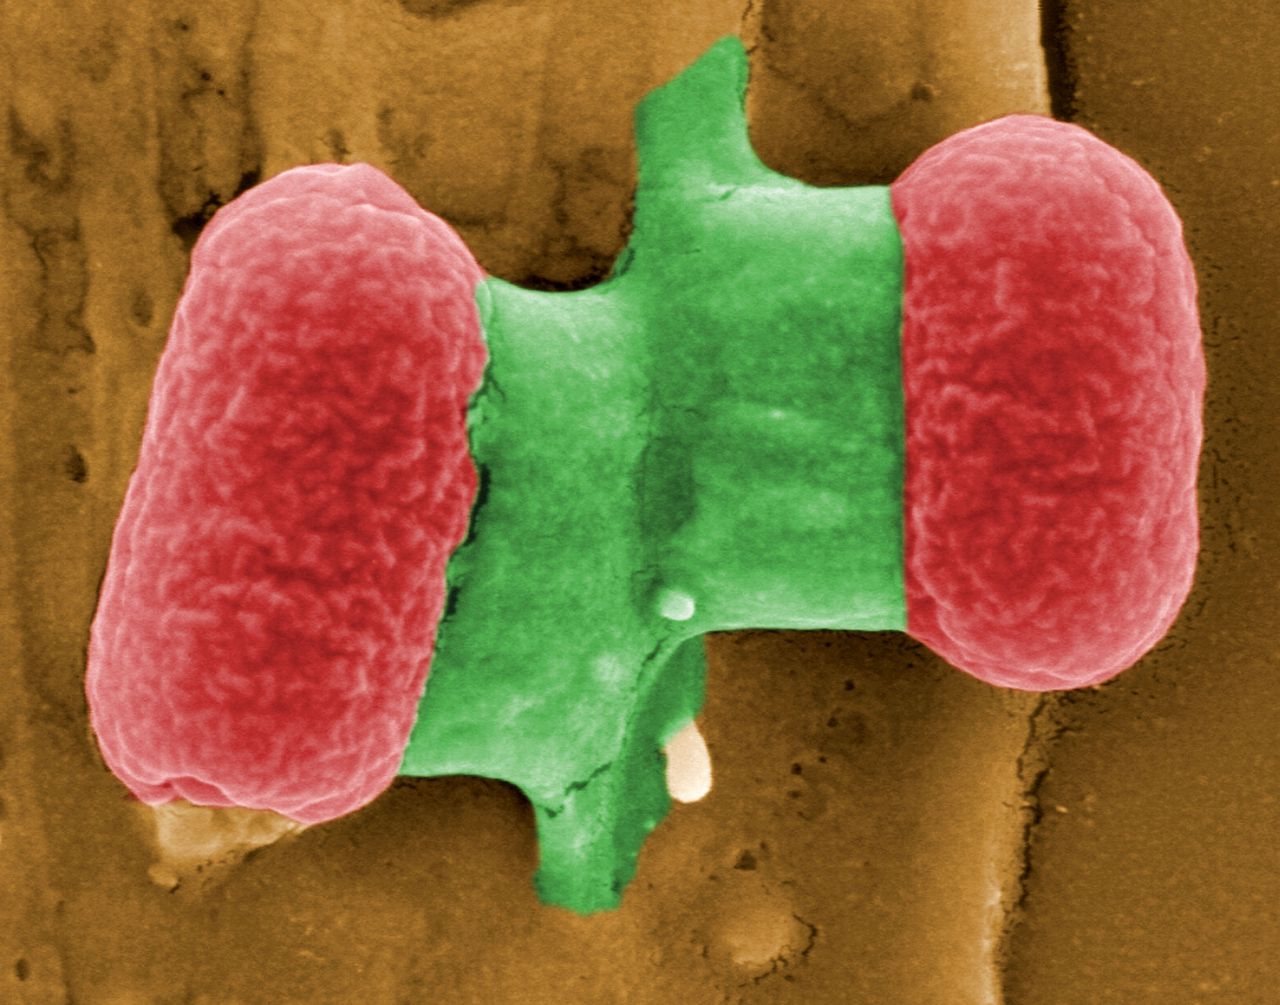 This handout image made available by the "Helmholtz-Zentrum für Infektionsforschung (HZI)" on May 26, 2011 shows the E. coli (EHEC) bacteria. Germany has warned consumers to be especially careful when eating tomatoes, lettuce, and cucumbers which are believed to be responsible for an outbreak of food poisoning that has left three dead. AFP PHOTO HO / Manfred Rohde, Helmholtz-Zentrum für Infektionsforschung (HZI)" RESTRICTED TO EDITORIAL USE - MANDATORY CREDIT " NO MARKETING NO ADVERTISING CAMPAIGNS - DISTRIBUTED AS A SERVICE TO CLIENTS